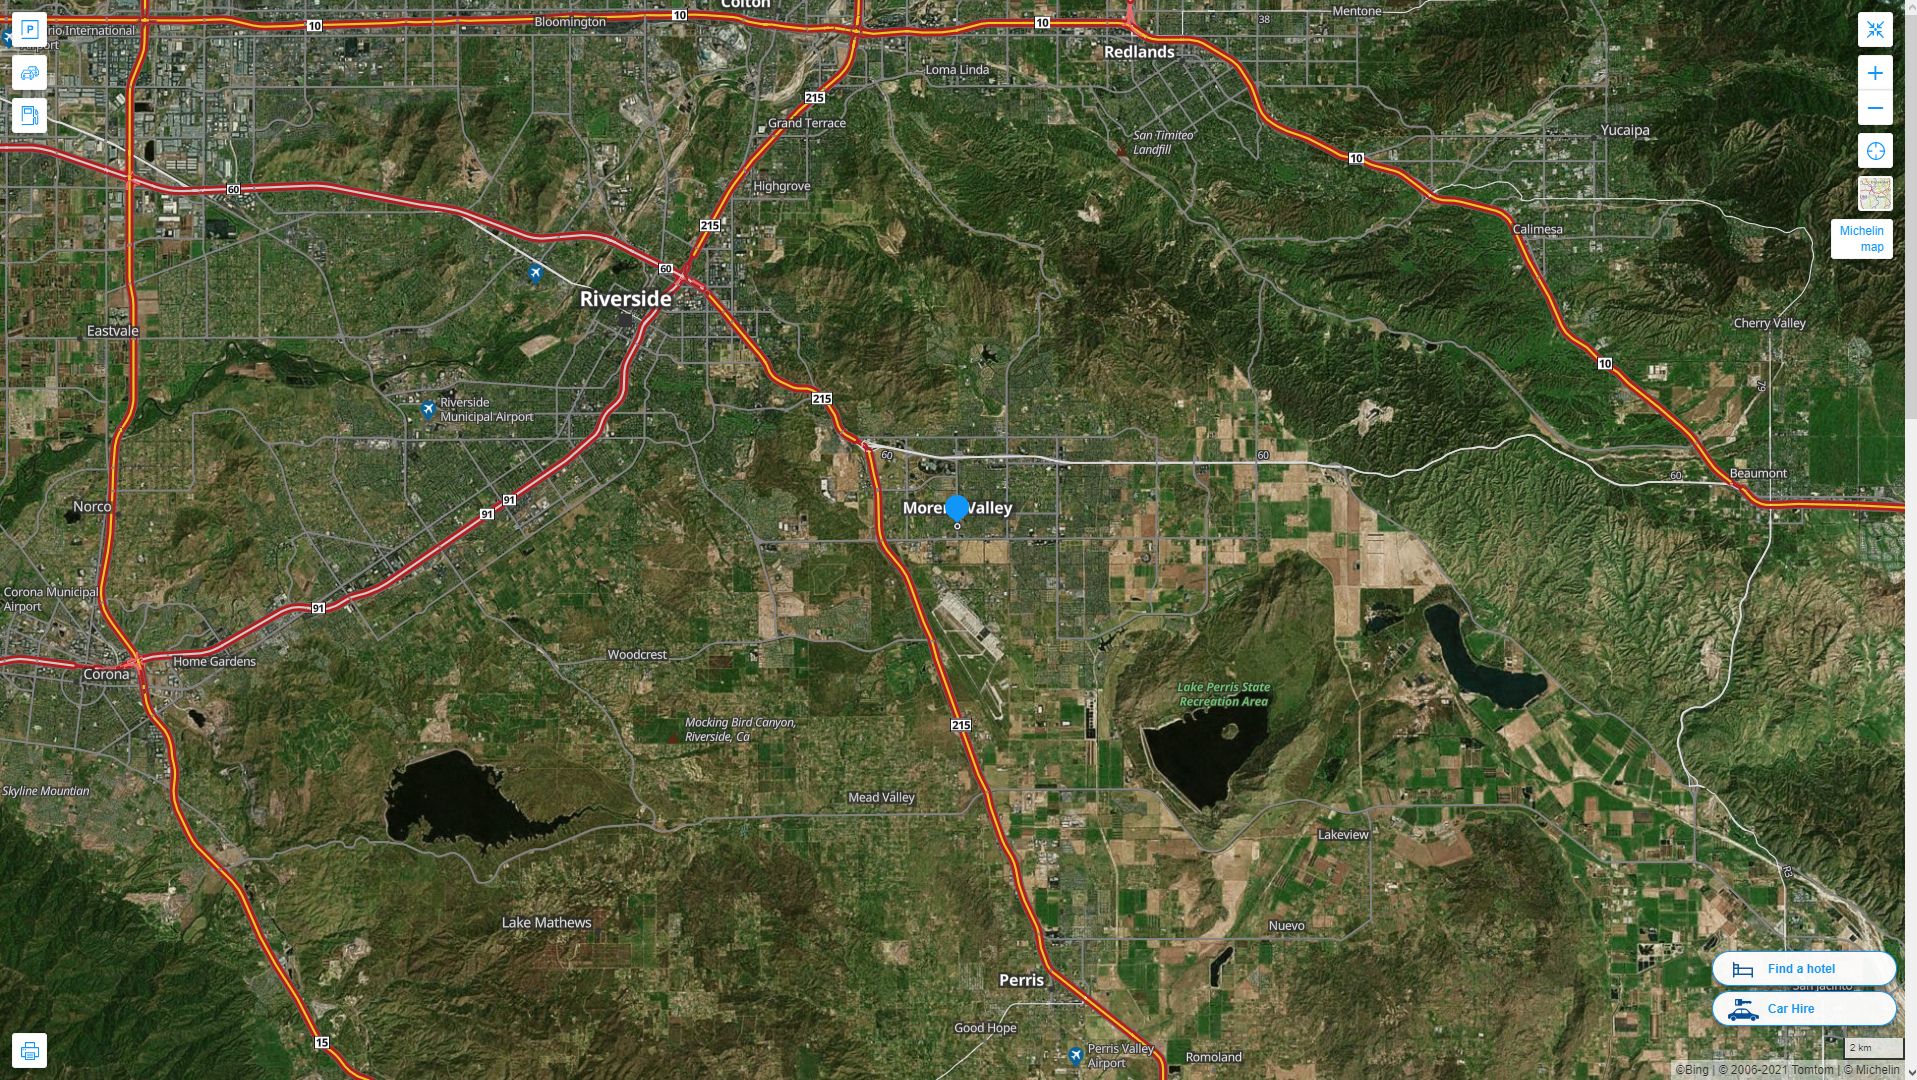 Moreno Valley California Highway and Road Map with Satellite View